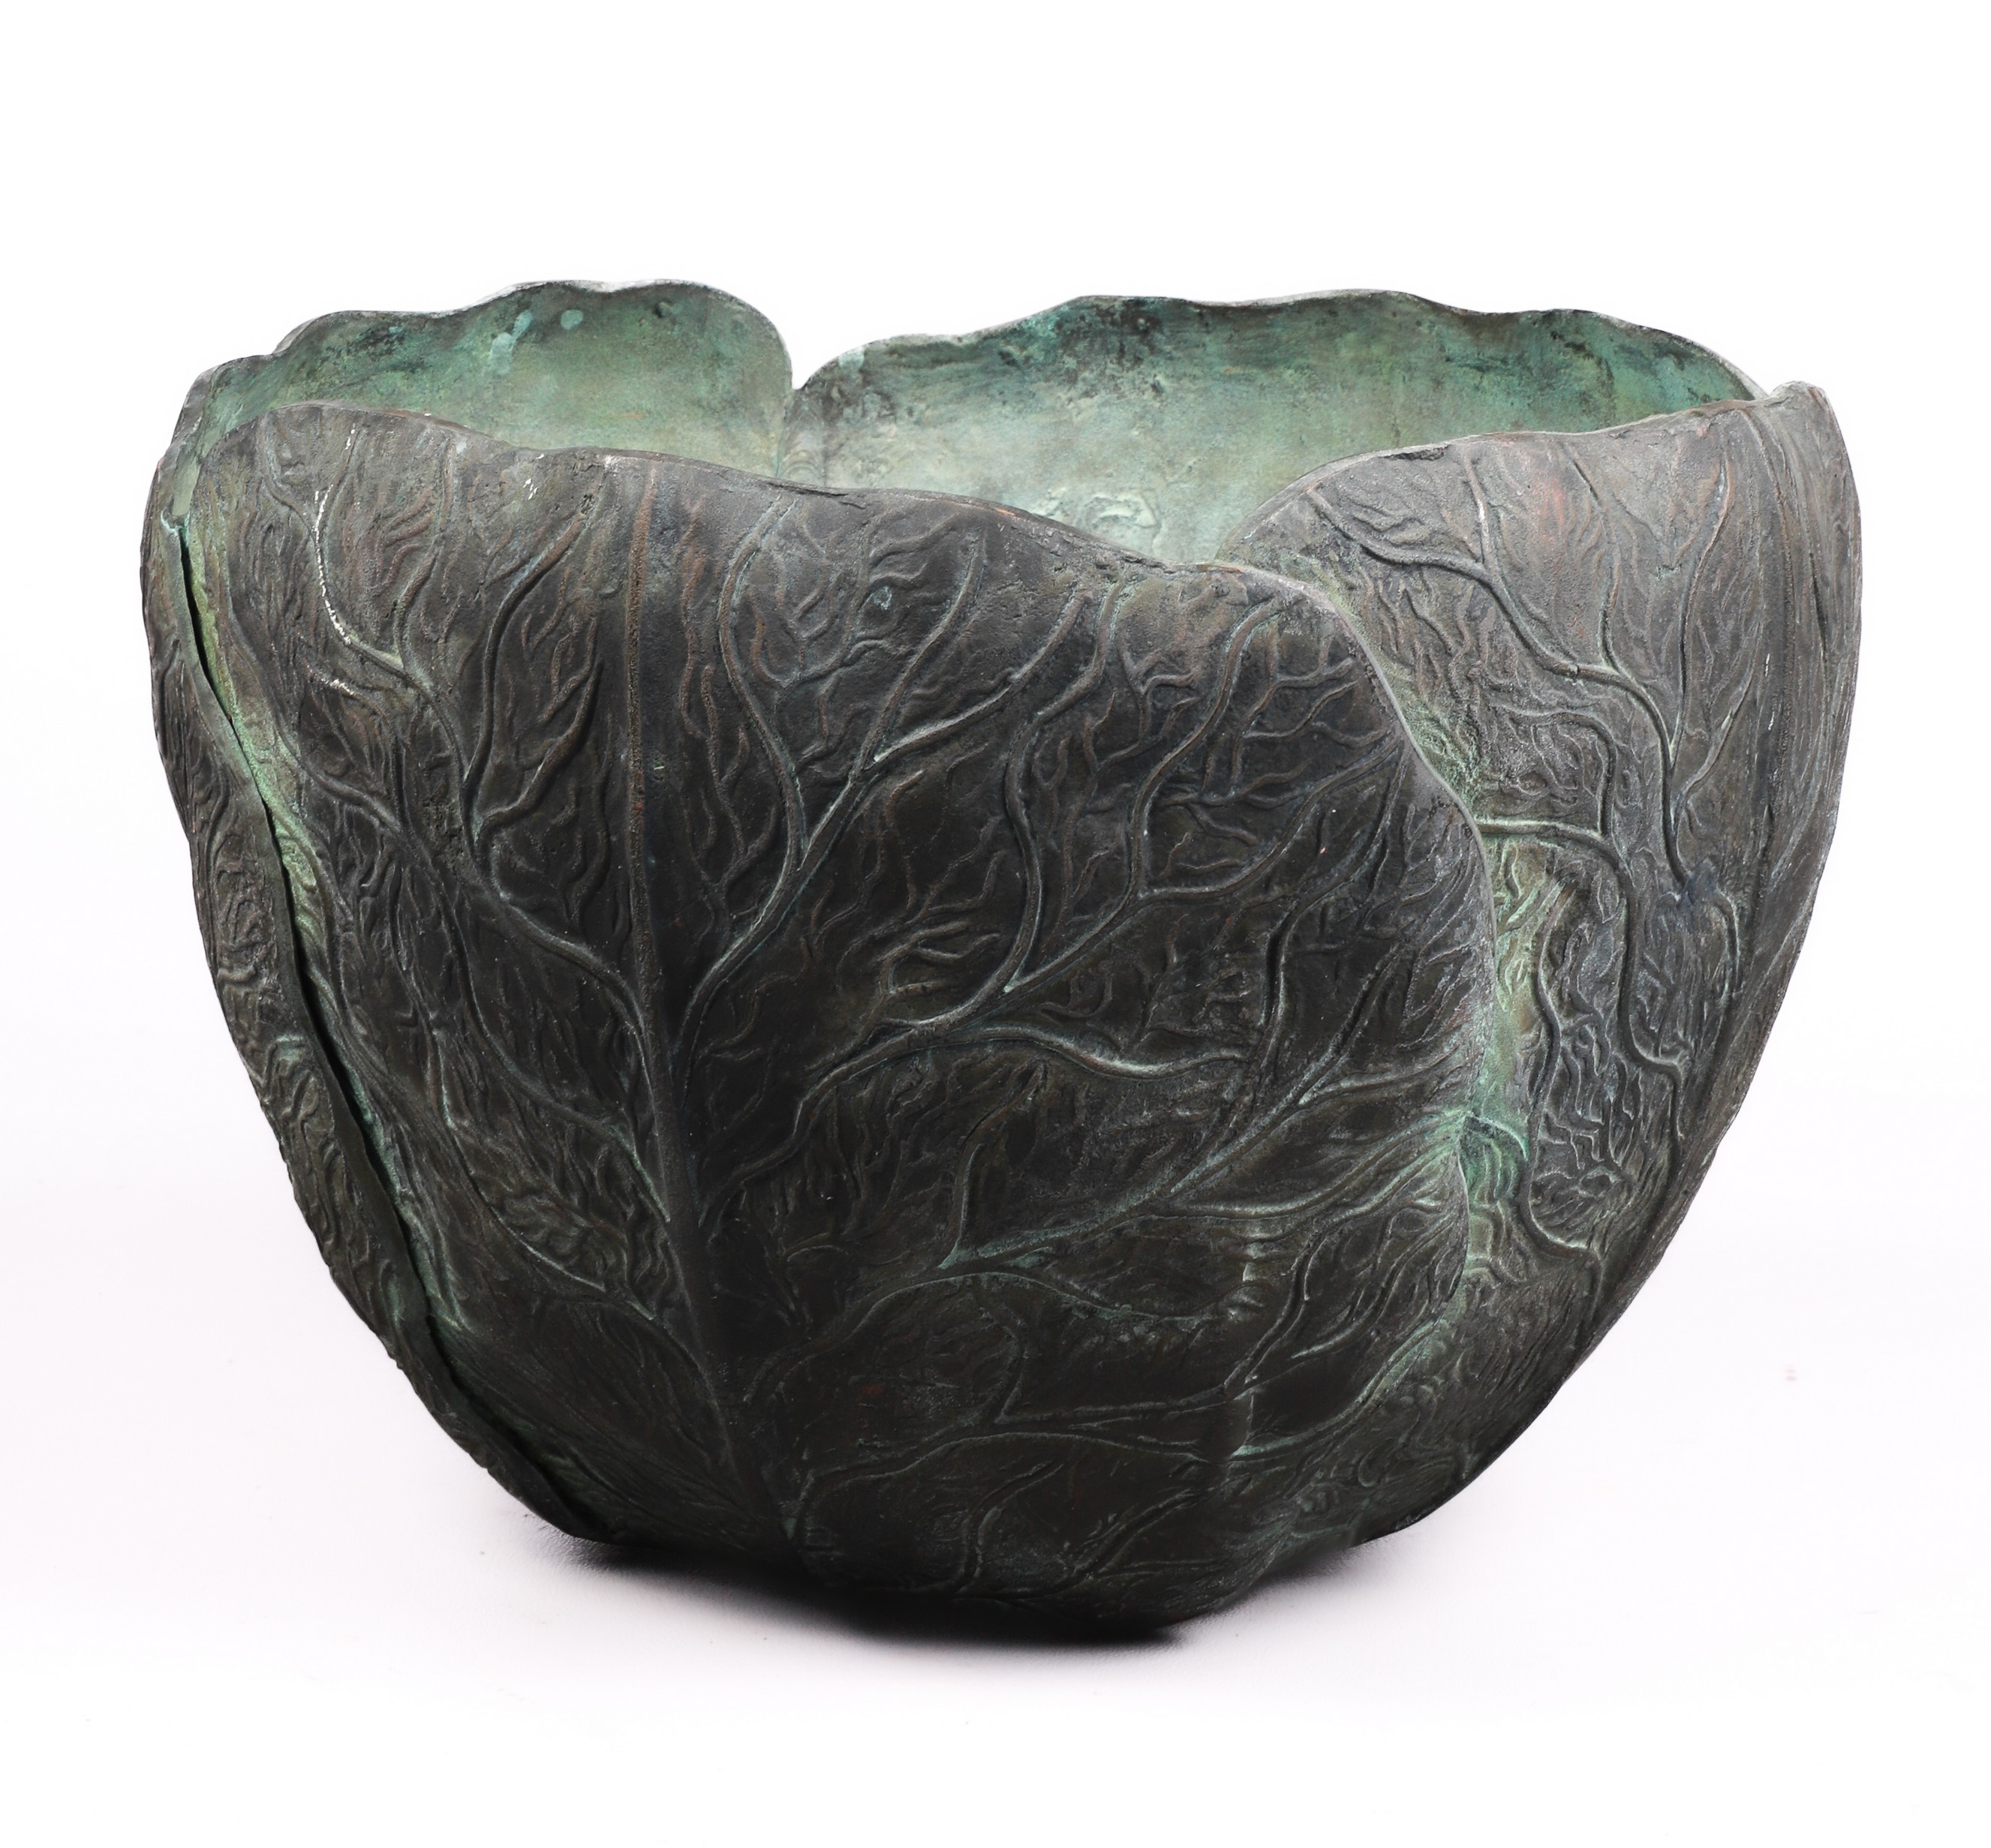 Patinated bronze cabbage bowl,